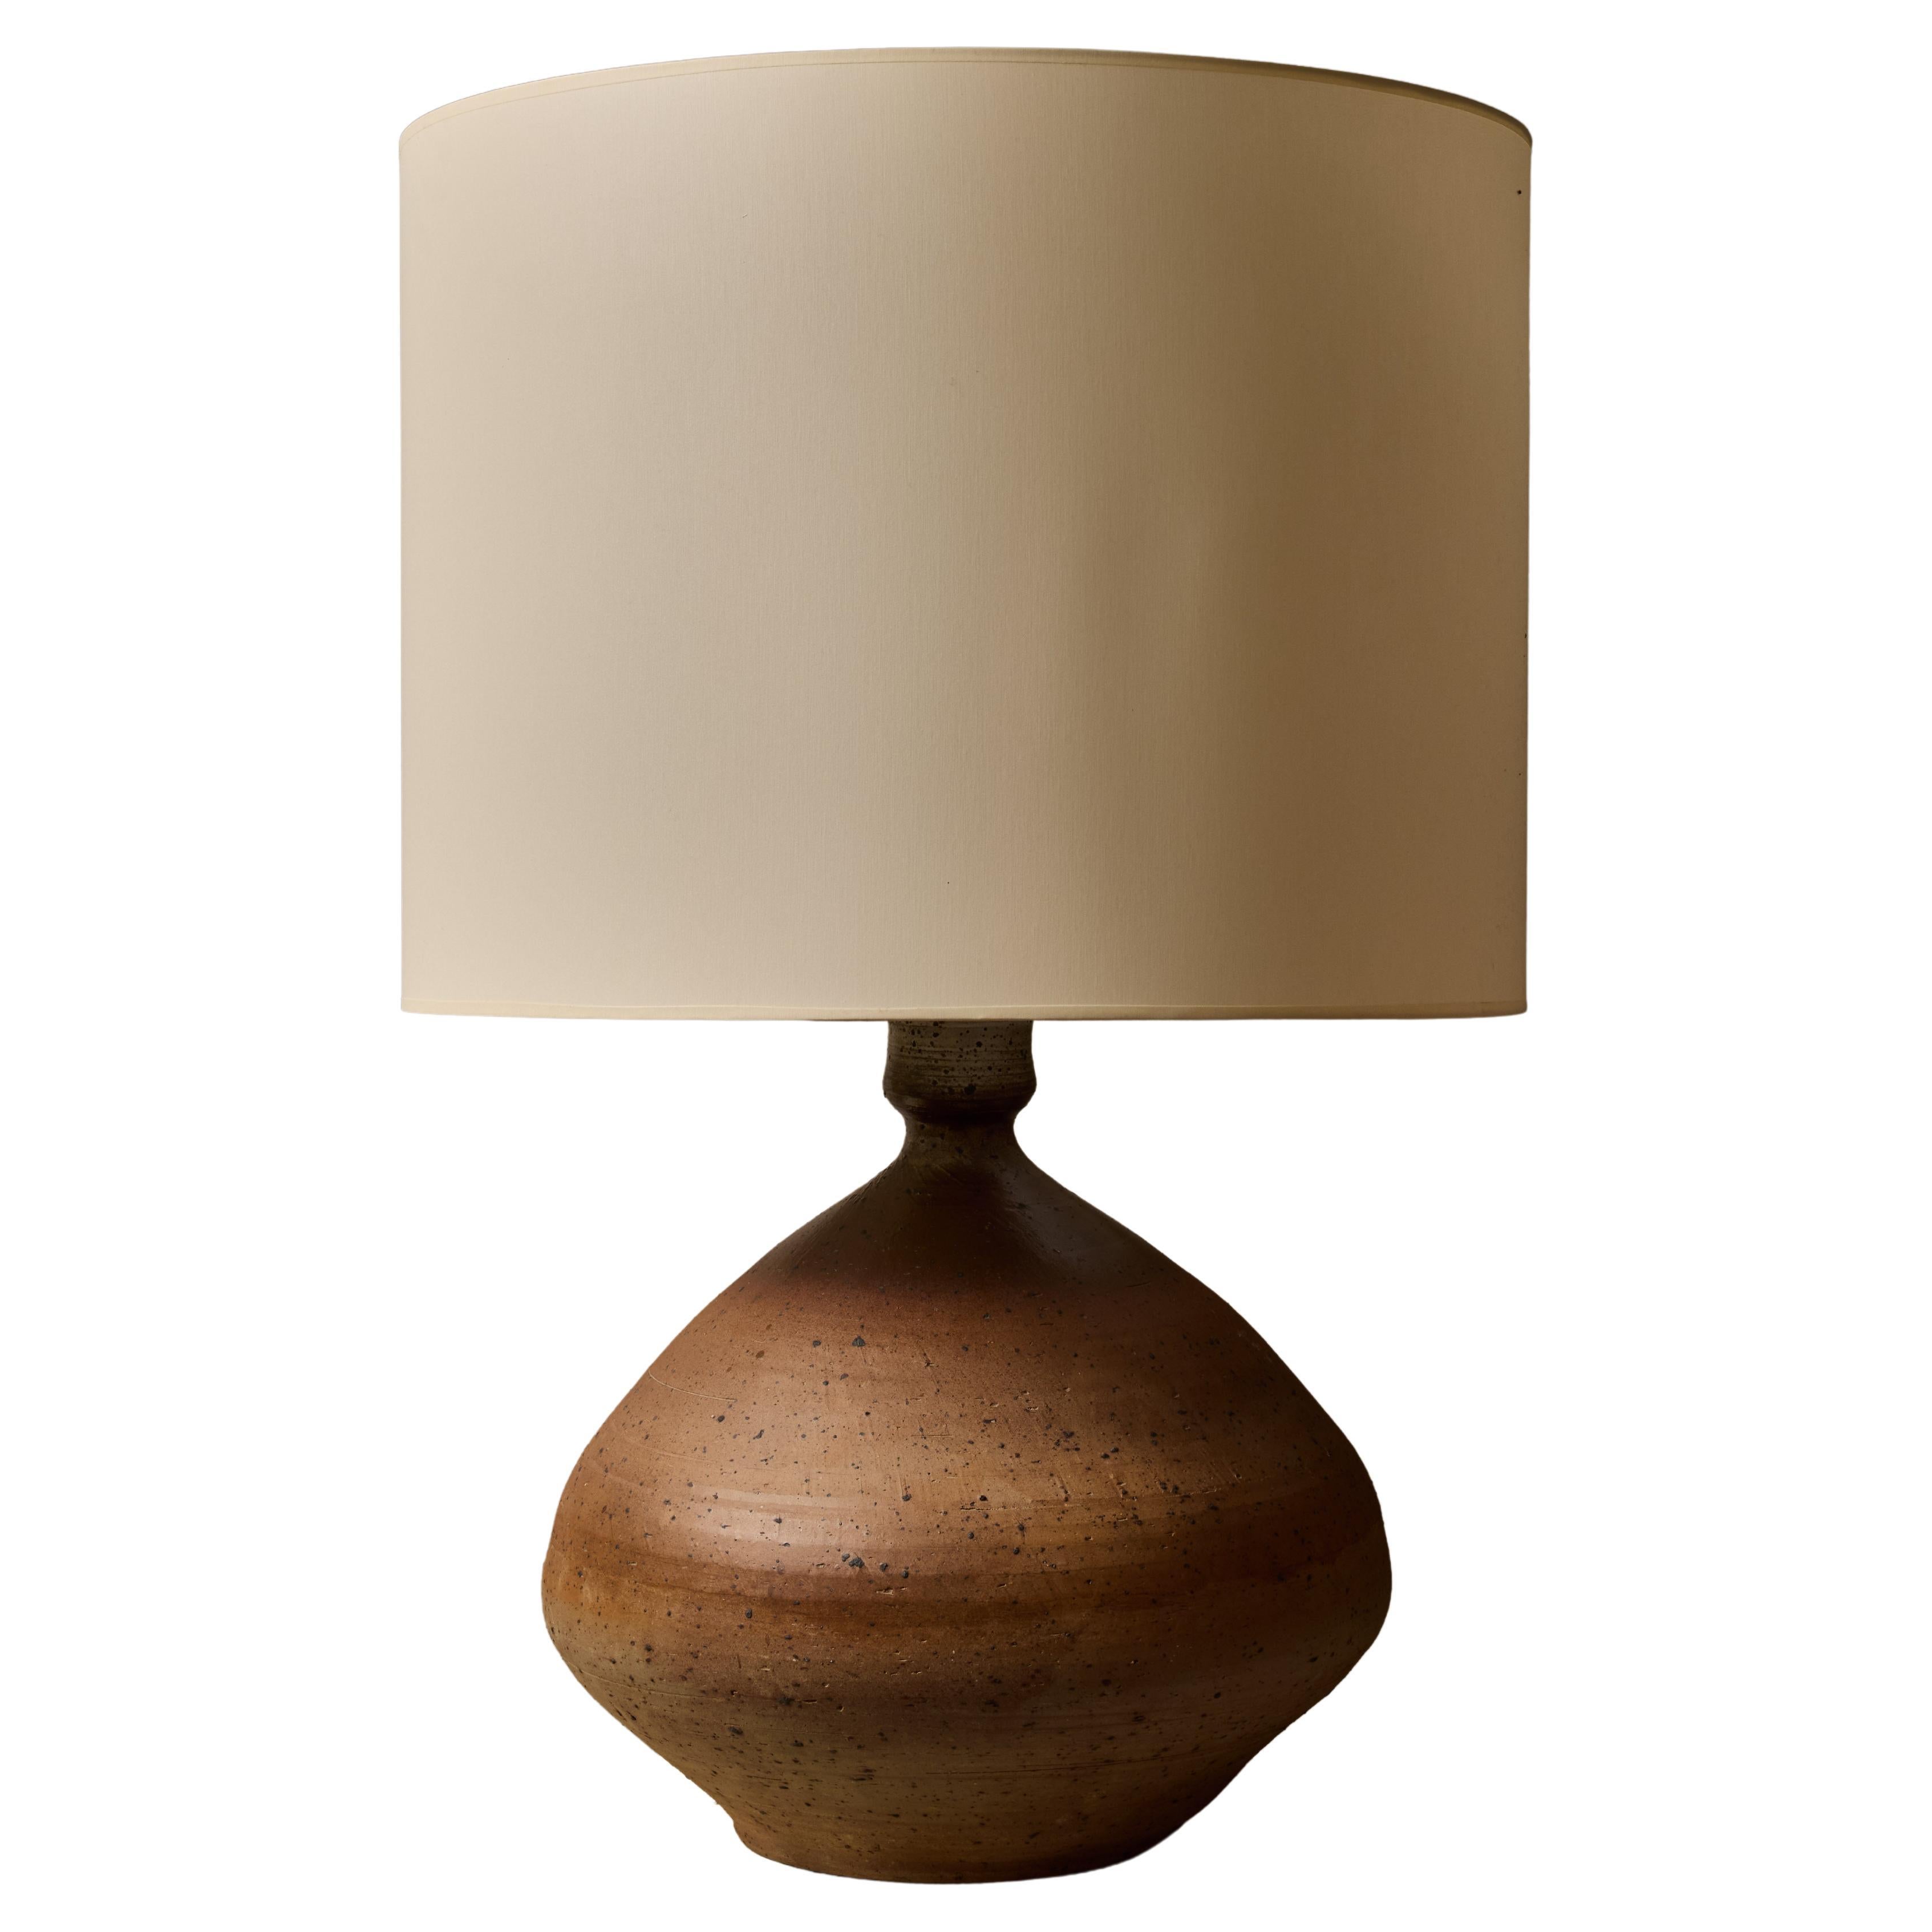 Massive Table Lamp in Different Shades of Terracotta Colour by François Lanusé